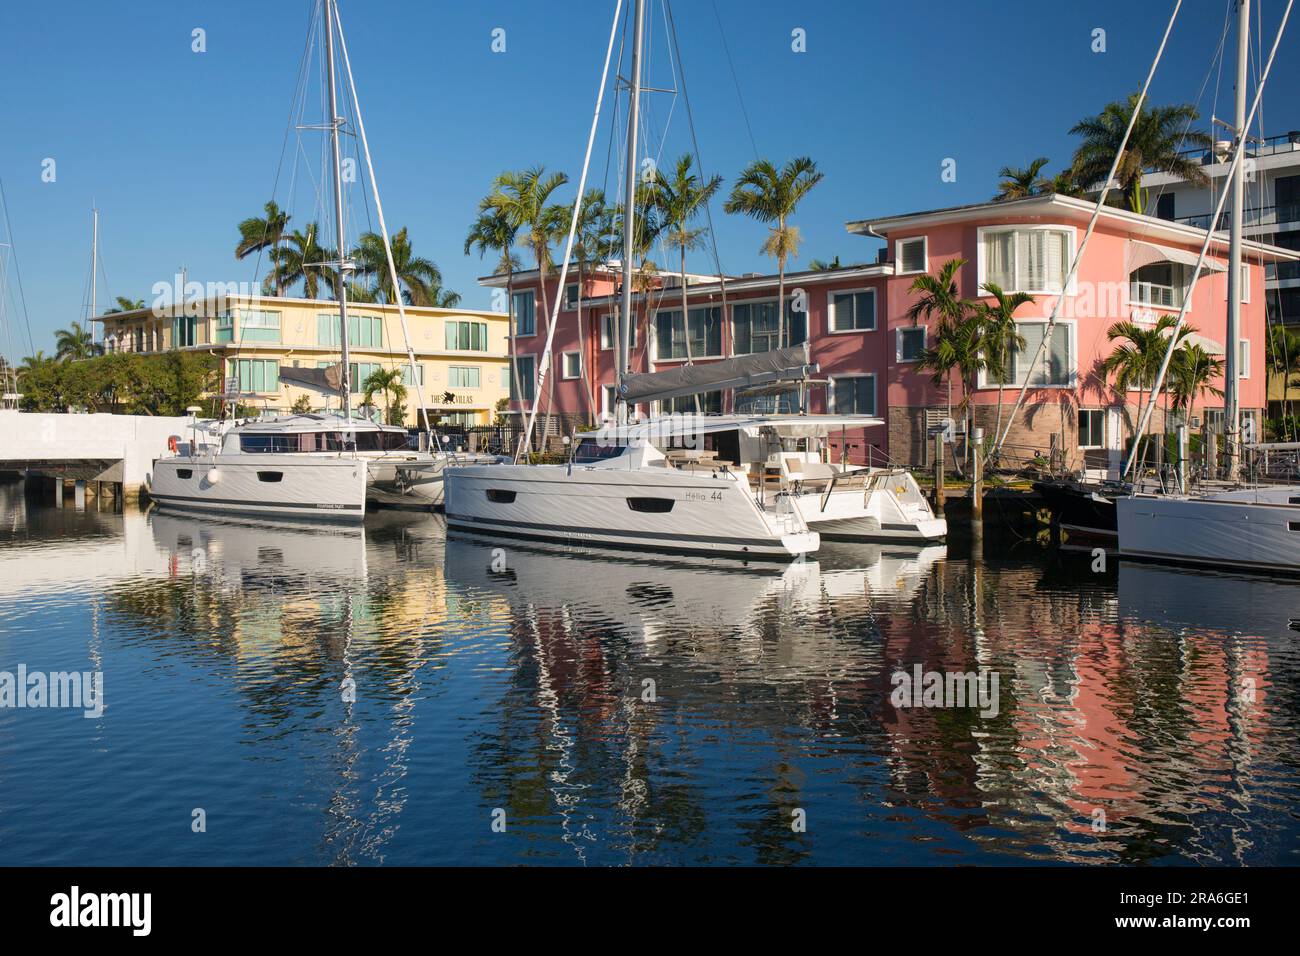 Fort Lauderdale, Florida, USA. View across tranquil waterway in the Nurmi Isles district, early morning, yachts moored outside colourful houses. Stock Photo